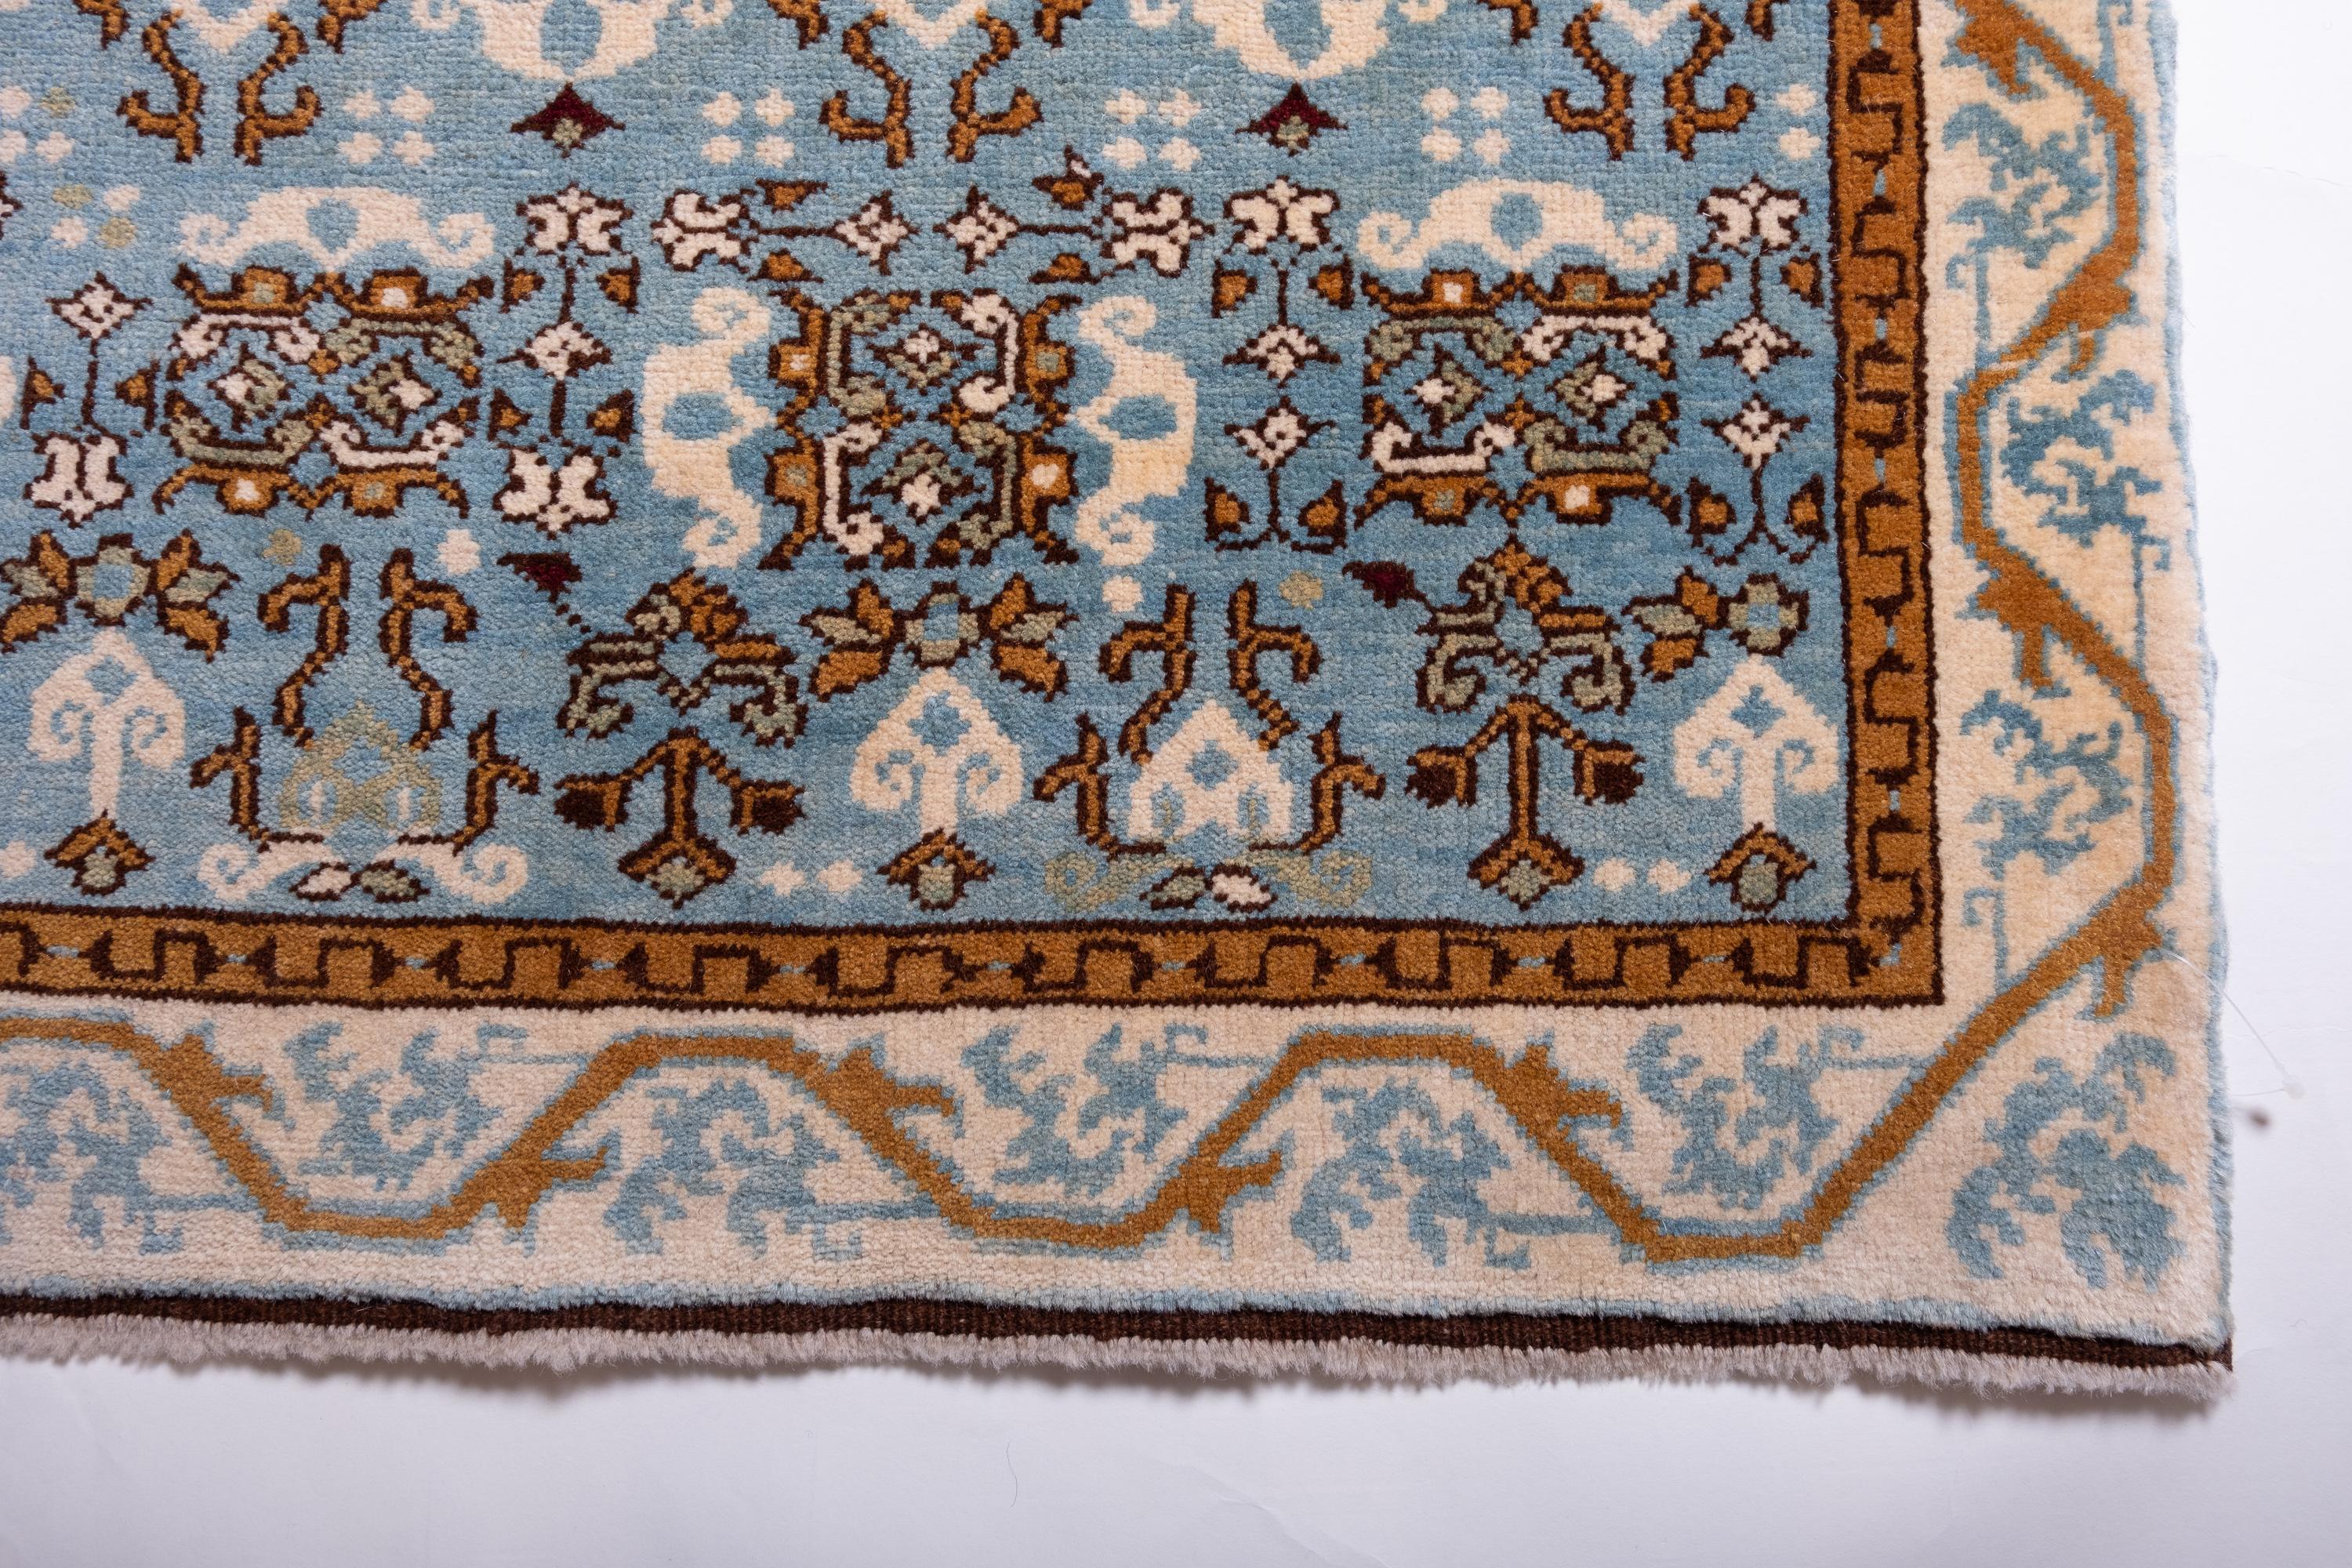 The design source of the rug comes from The C. L. David Collection, Copenhagen. This rug with the Cusped Medallion was designed in the early 16th-century rug by Mamluk Sultane of Cairo, Egypt. Once in the Hirth Collection, and later with Ulrich